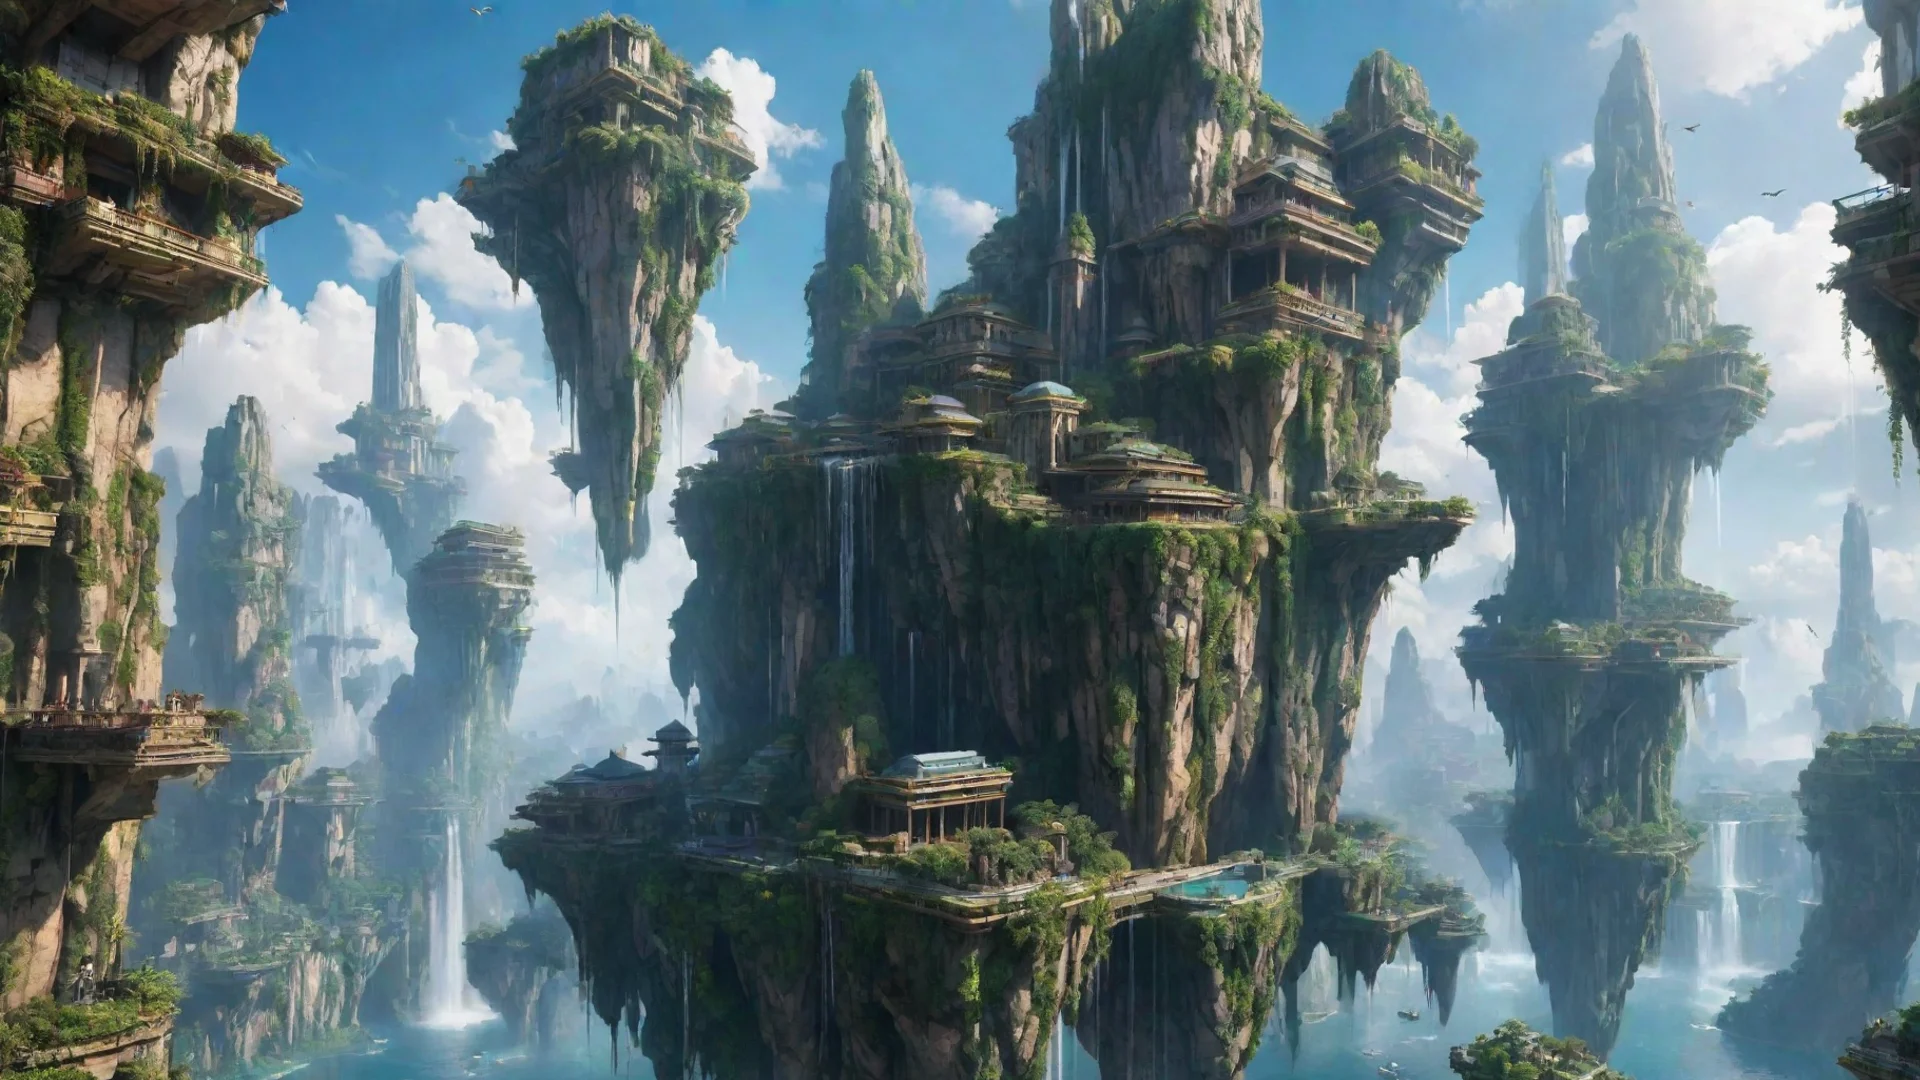 artstation art futuristic city amazing unreal architecture in sky epic floating city on floating cliffs with waterfalls down beautiful sky hanging gardens hd aesthetic confident engaging wow 3 wide.